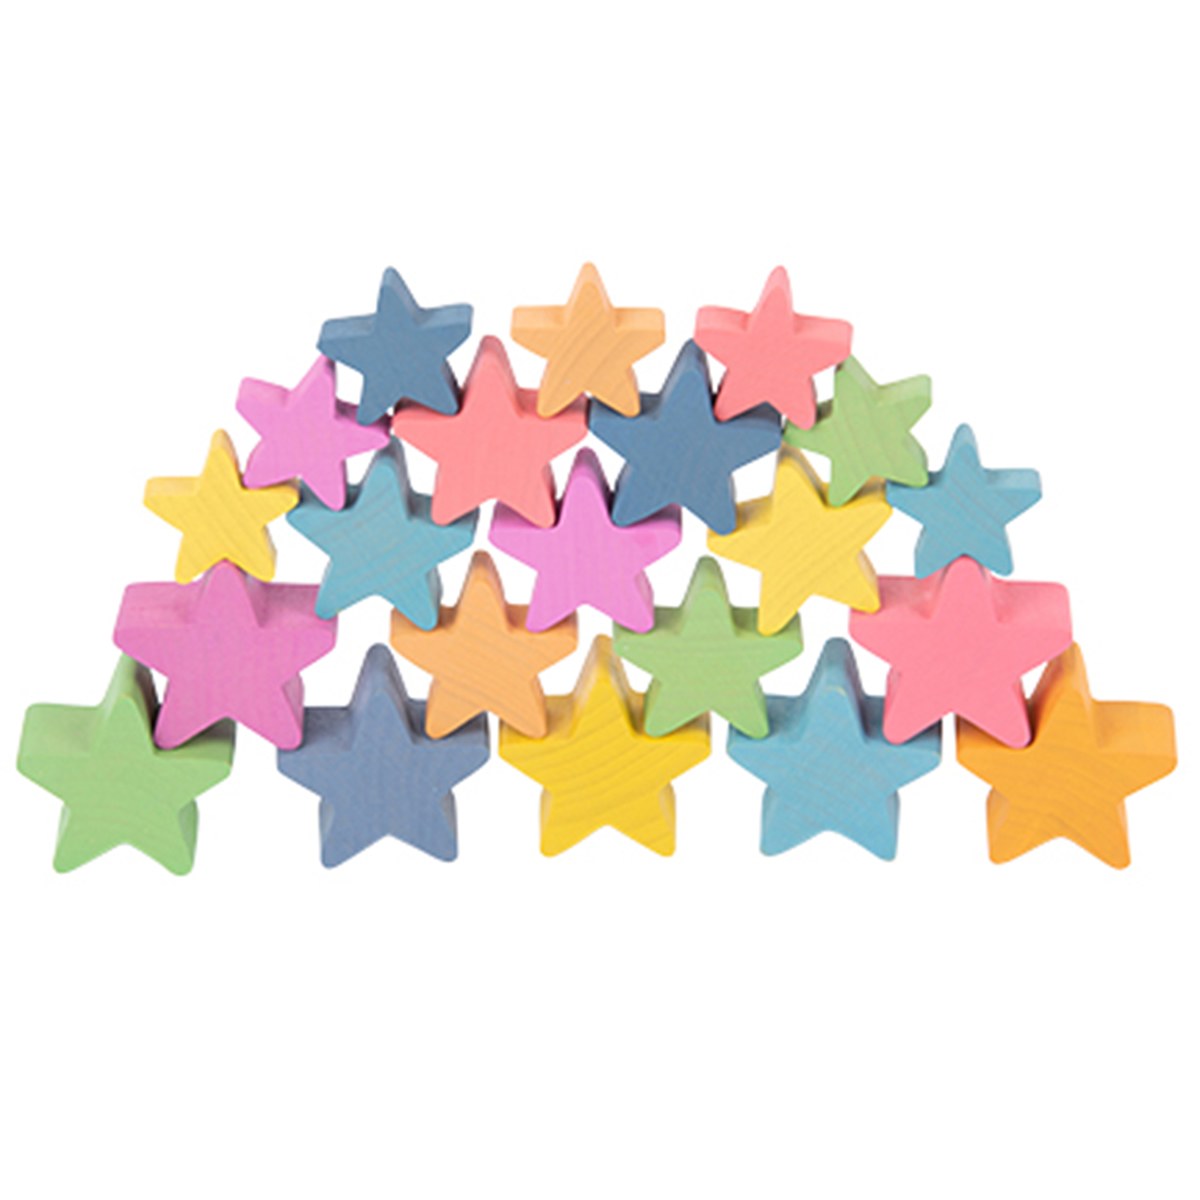 TickiT Stackable Rainbow Wooden Stars - 21 Pieces